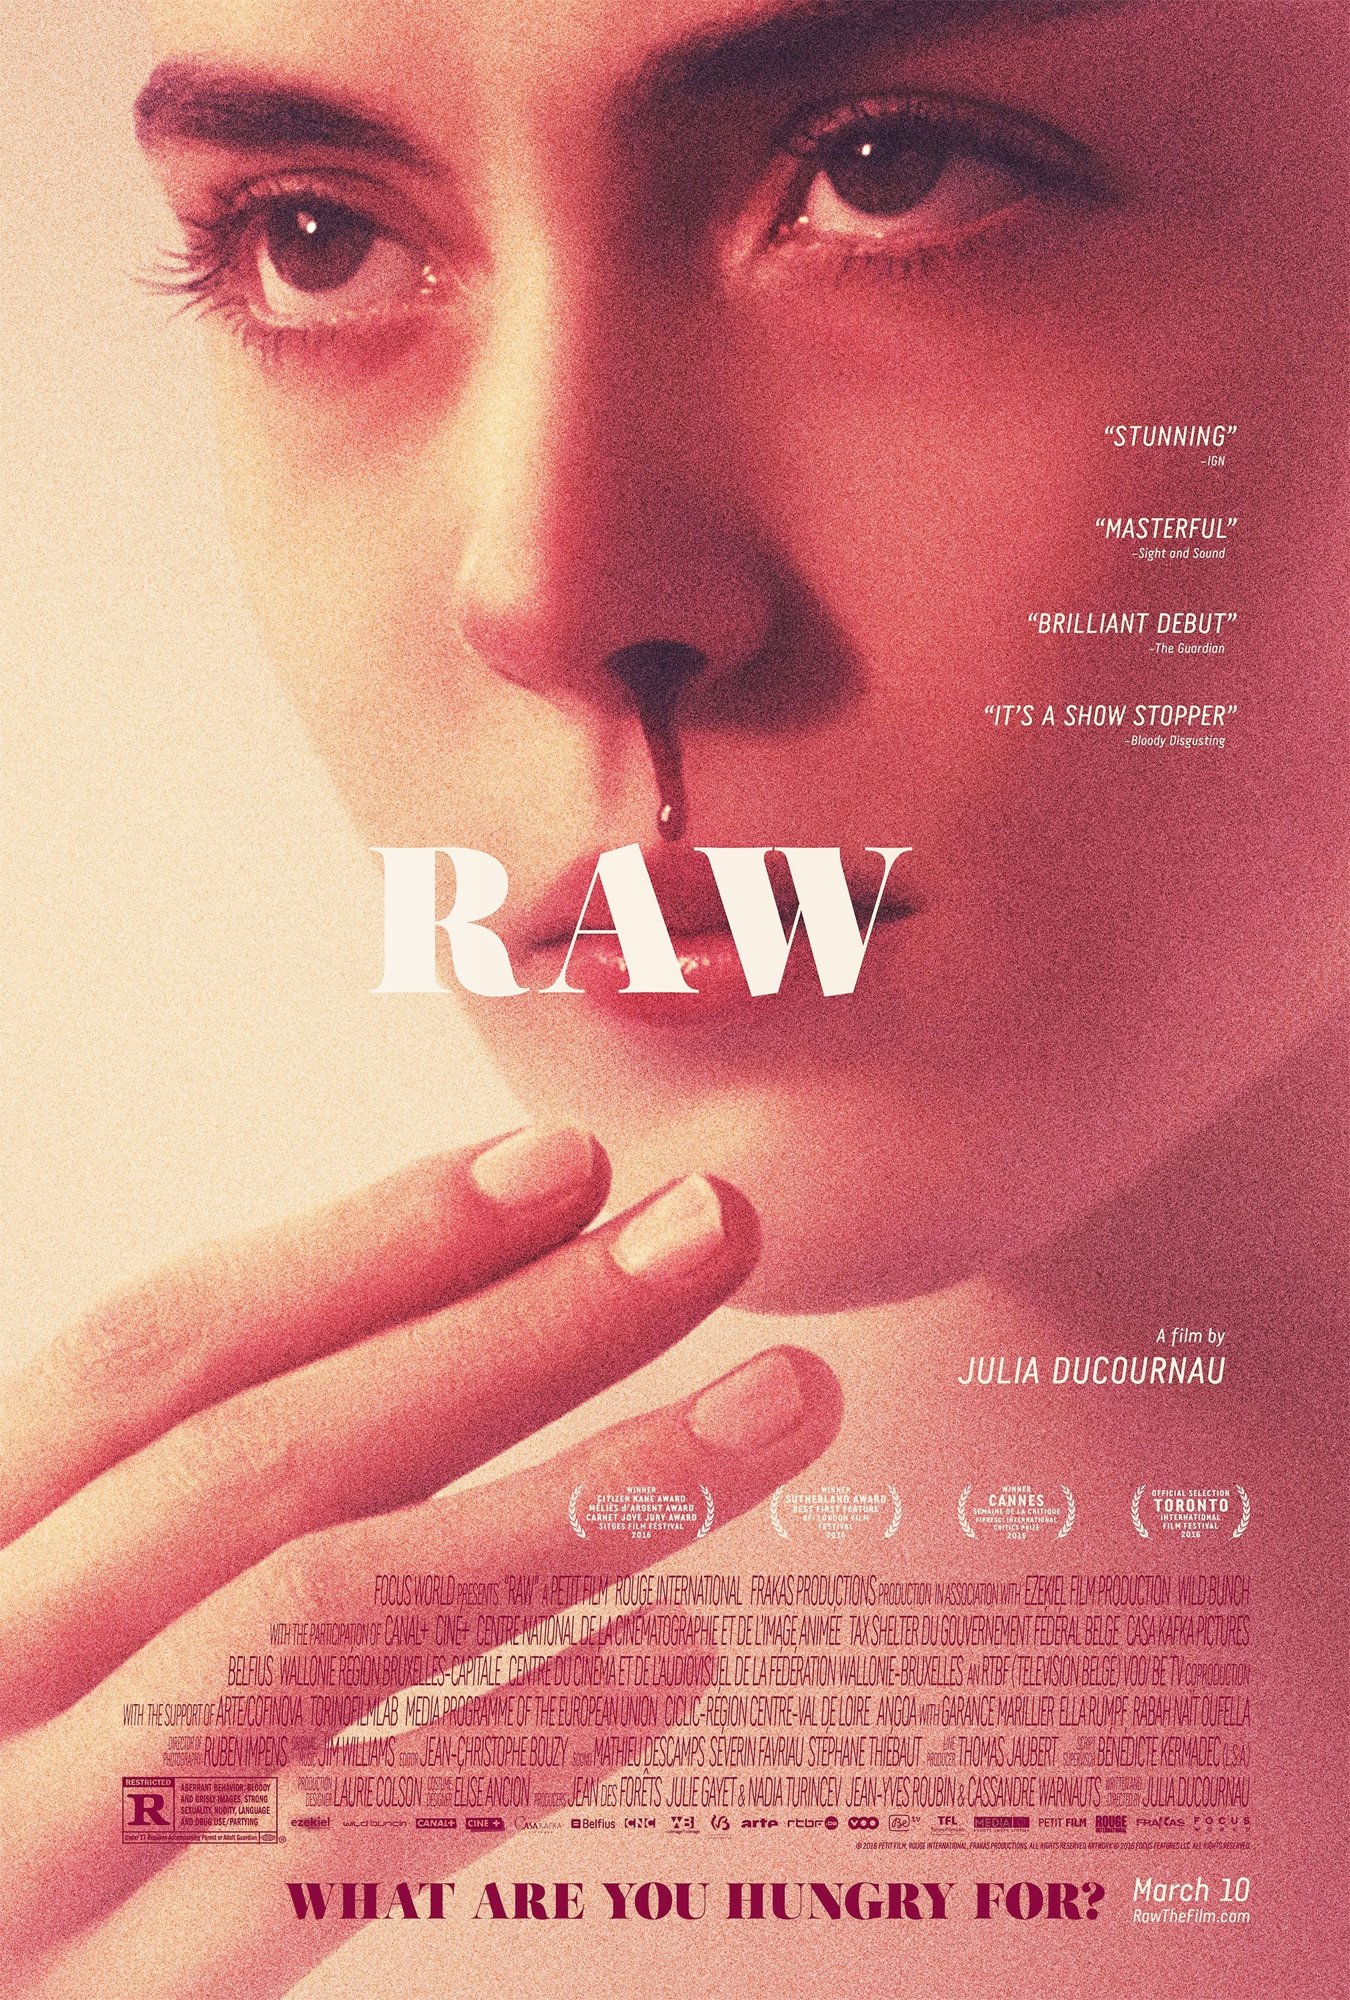 Poster of Focus World's Raw (2017)